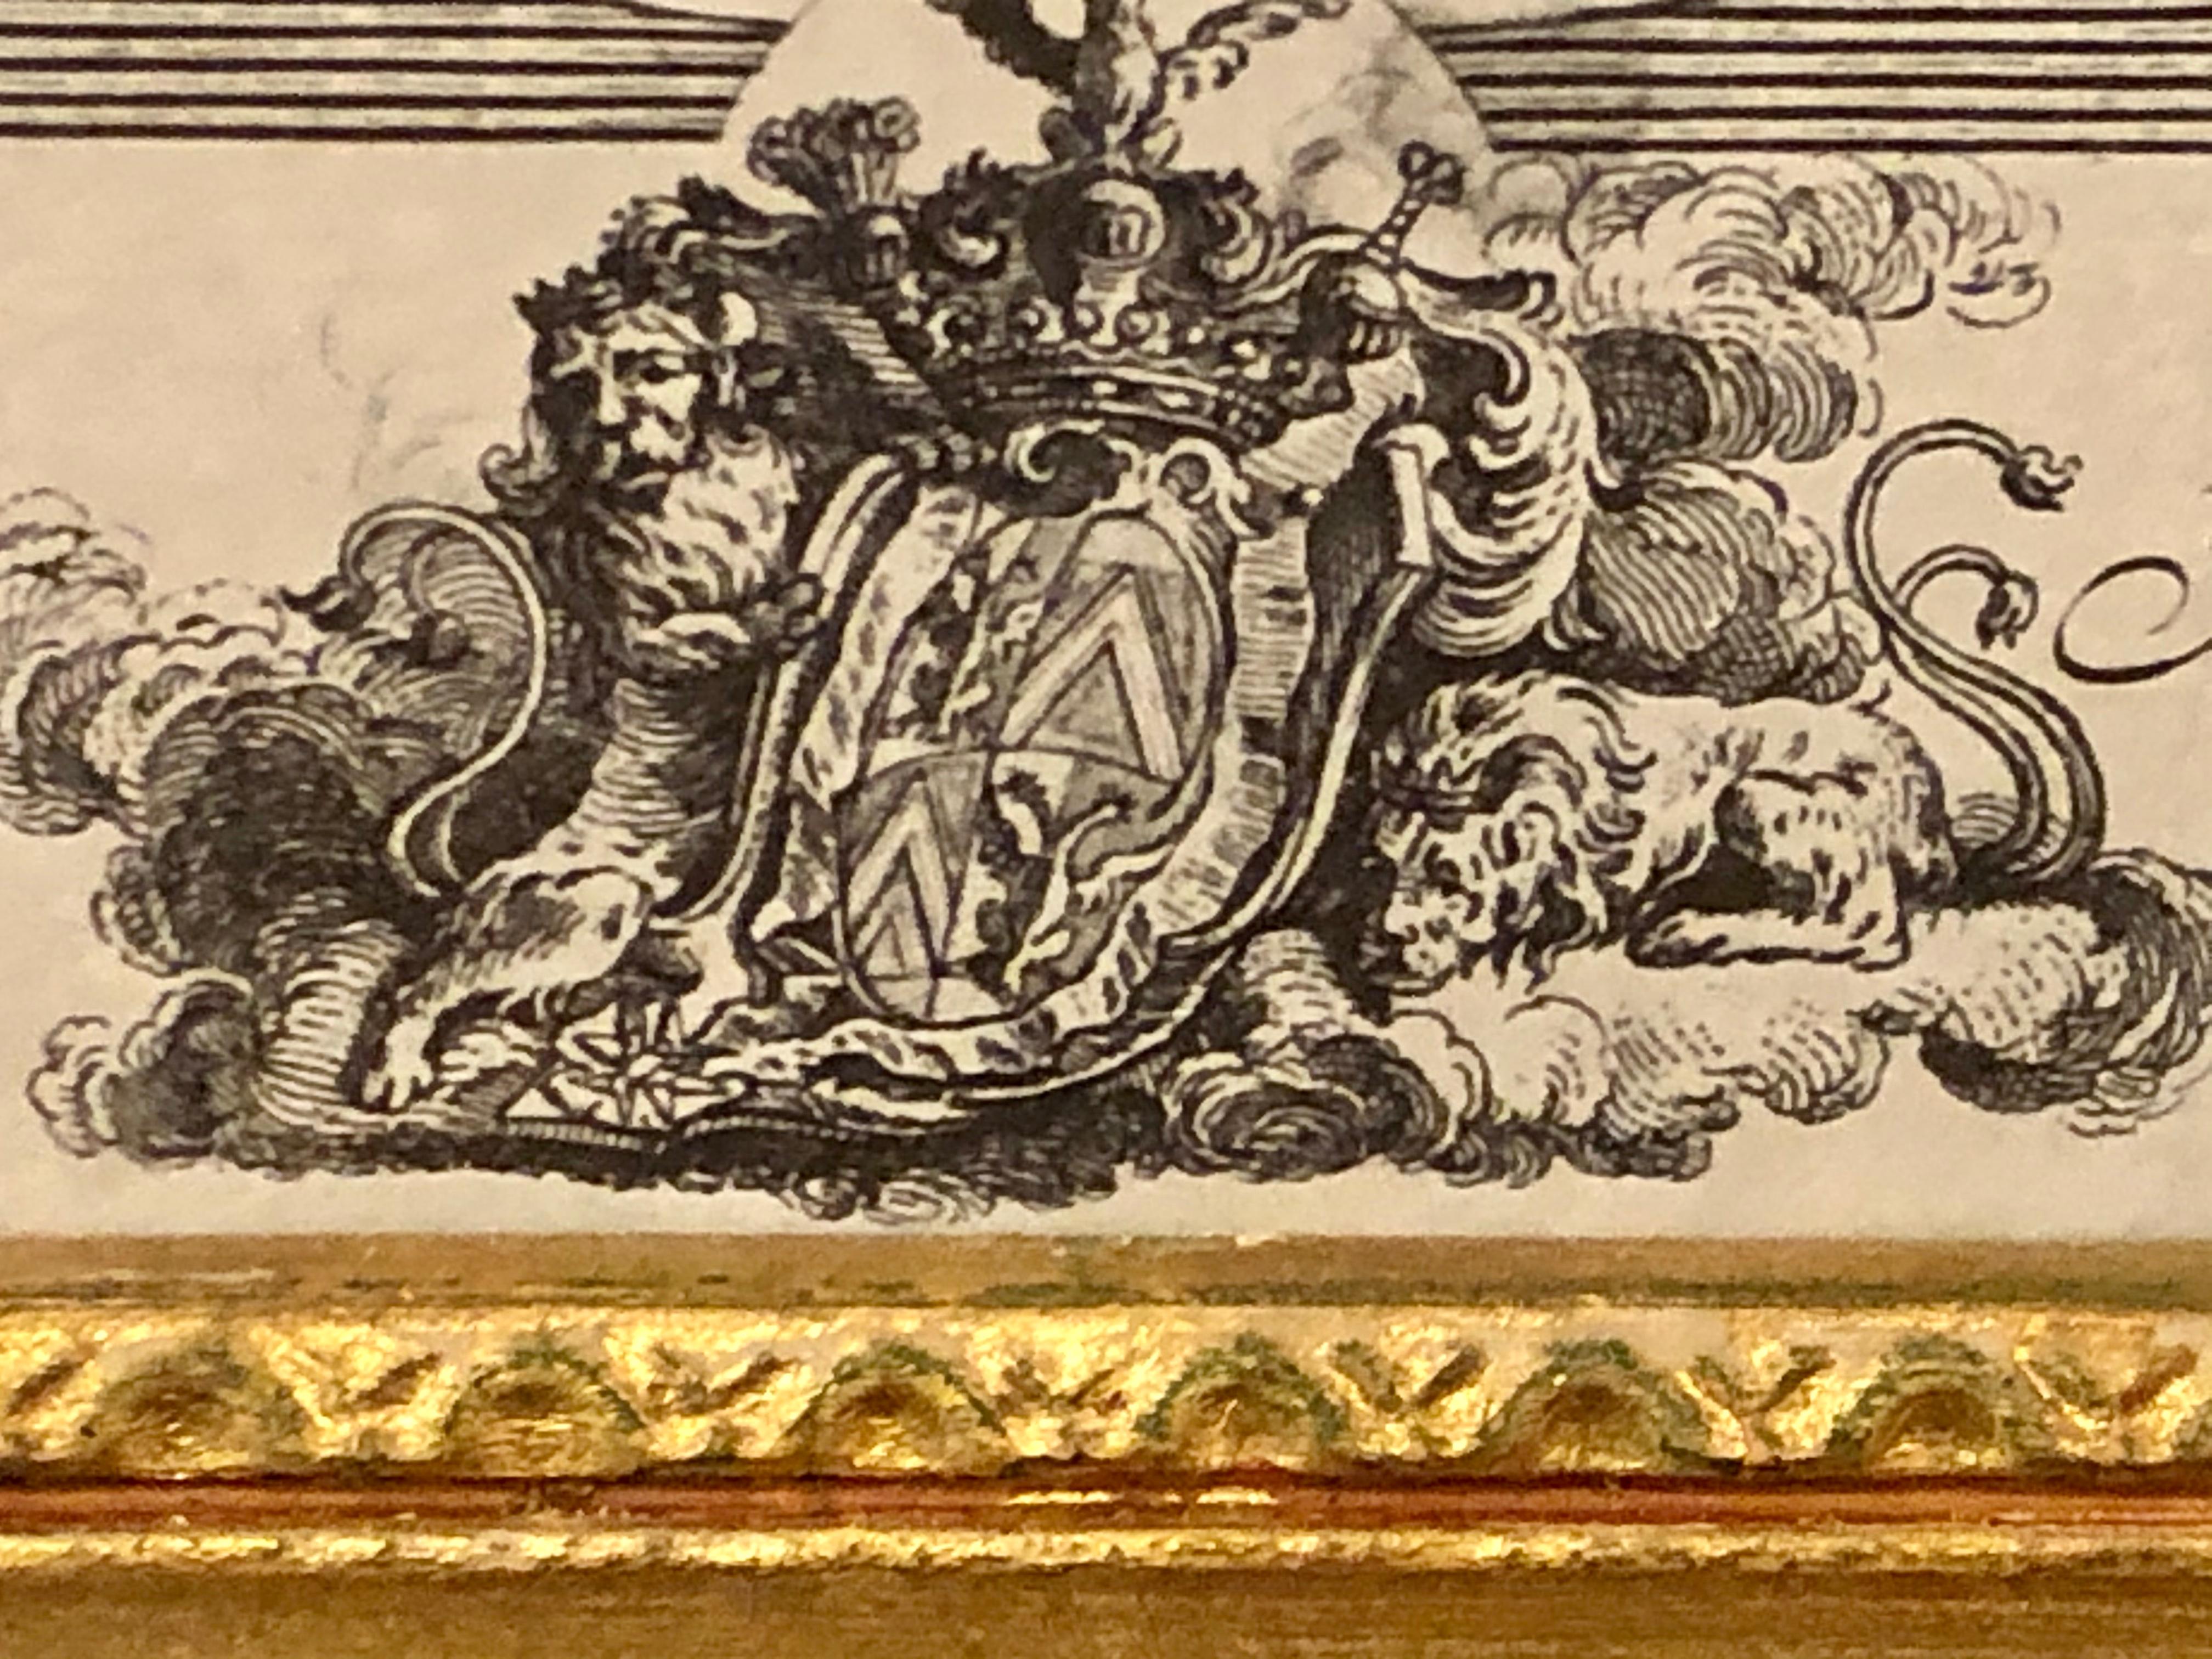 Four Framed Elements “Putti” Etchings after François Boucher’s 9